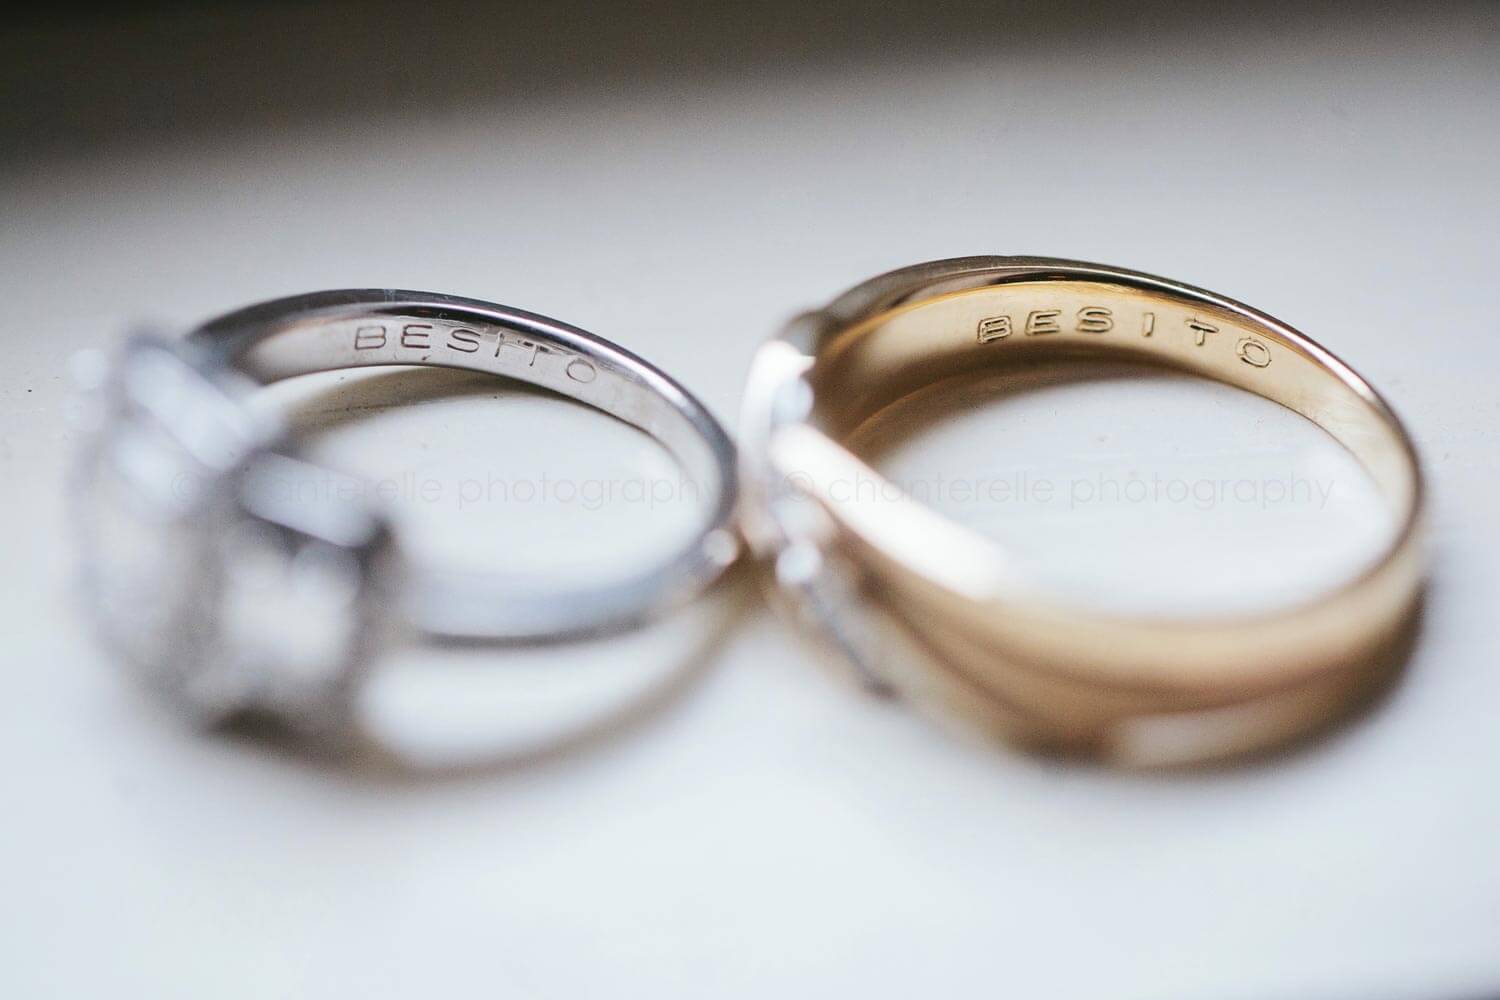 wedding rings engraved with besito kiss